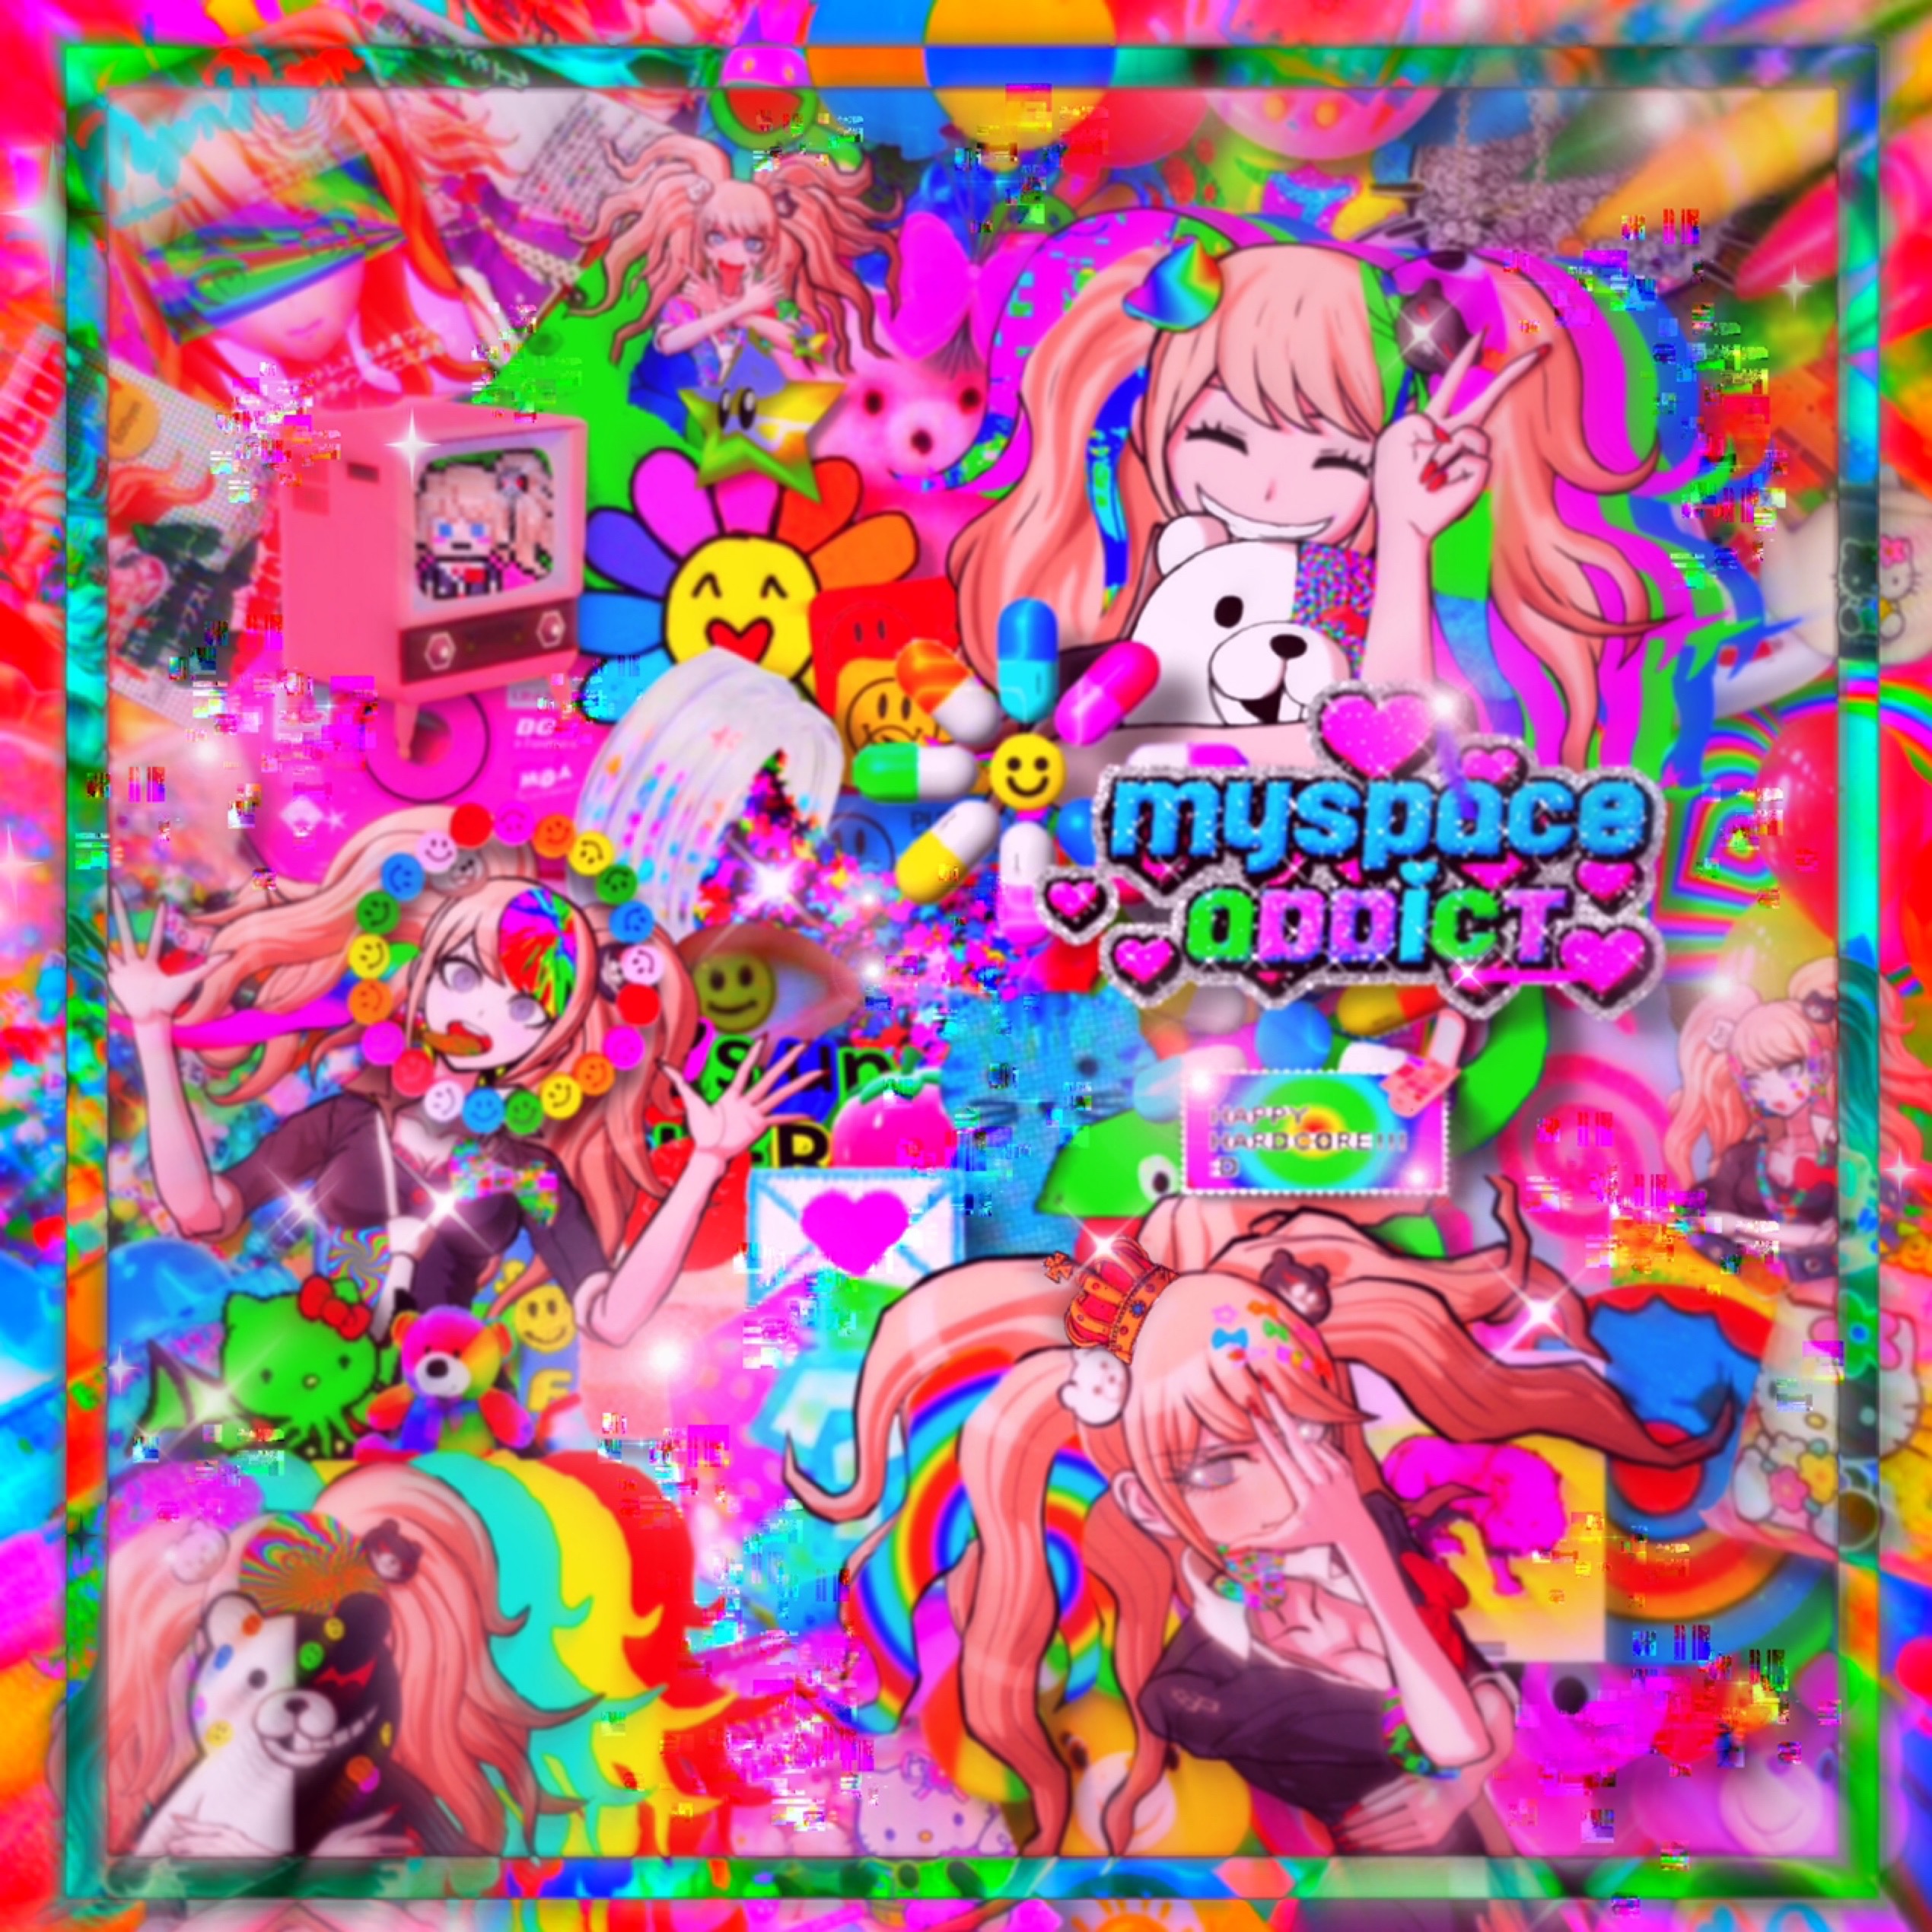 weirdcore kidcore glitchcore colorful Image by ᎪᎢᏞᎪᏚ